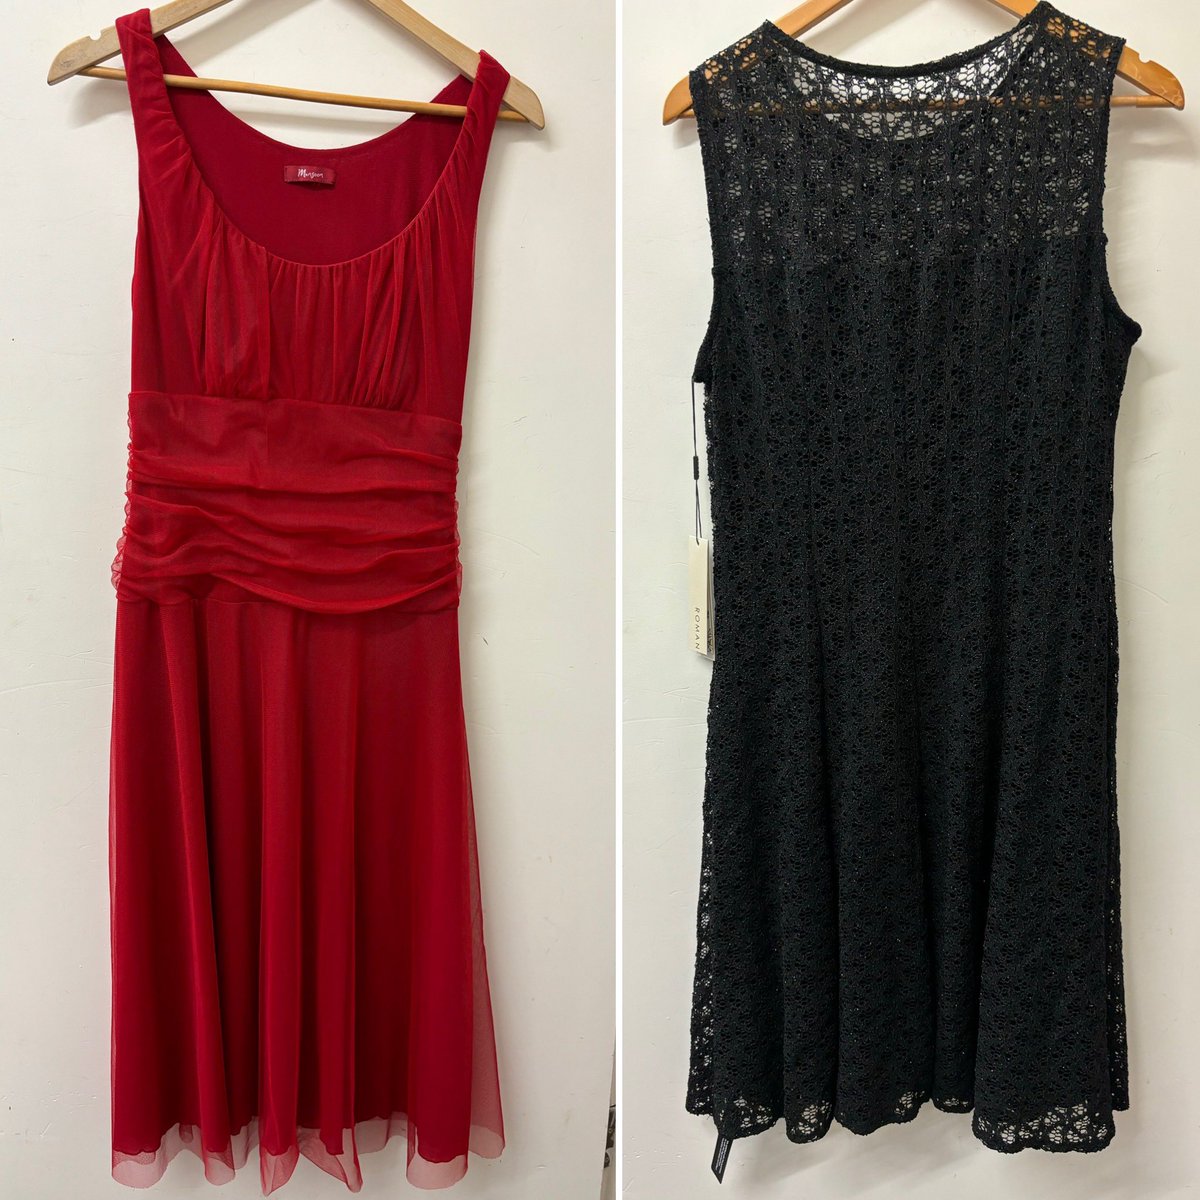 We have lots of fabulous new (preloved) party dress stock! Come and see our party dress sale rail, all items just £10 each Perfect for the festive season! 🎄 🥳 🎉 👗 #partydresses #prelovedfashion #charityshopfinds #droitwich #WorcestershireHour